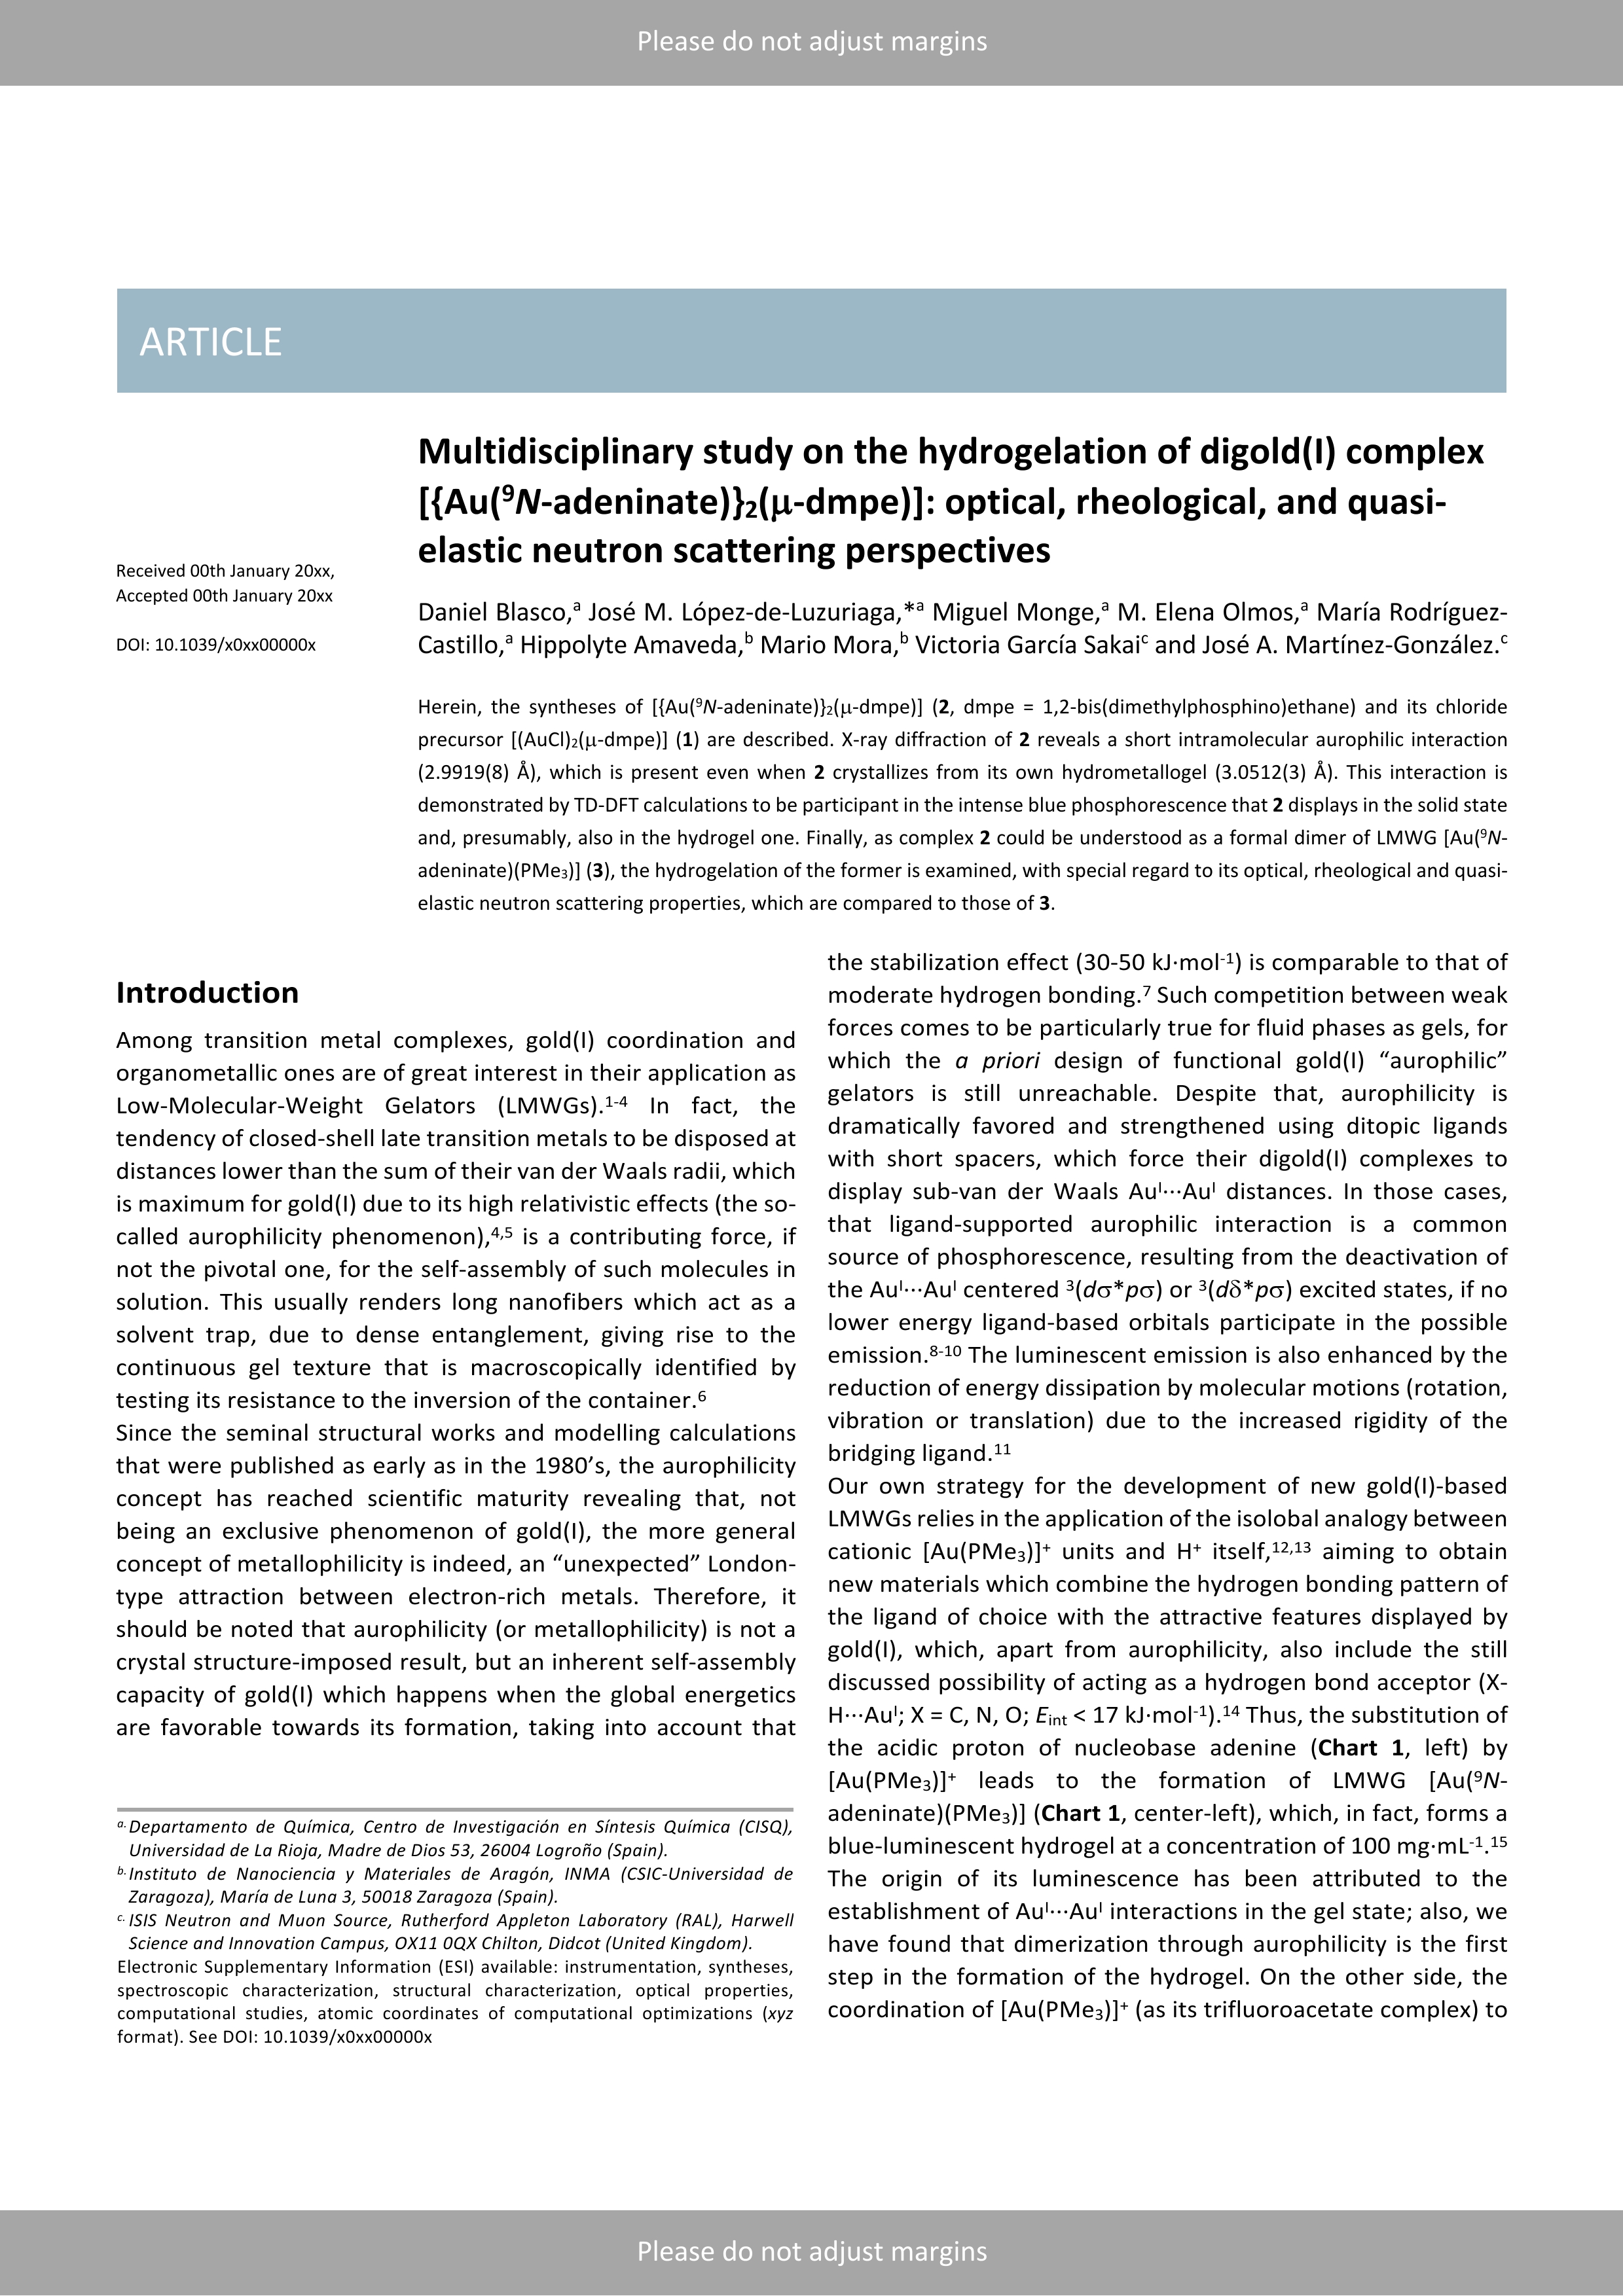 Multidisciplinary study on the hydrogelation of the digold(i) complex [{Au(9: N -adeninate)}2(µ-dmpe)]: Optical, rheological, and quasi-elastic neutron scattering perspectives